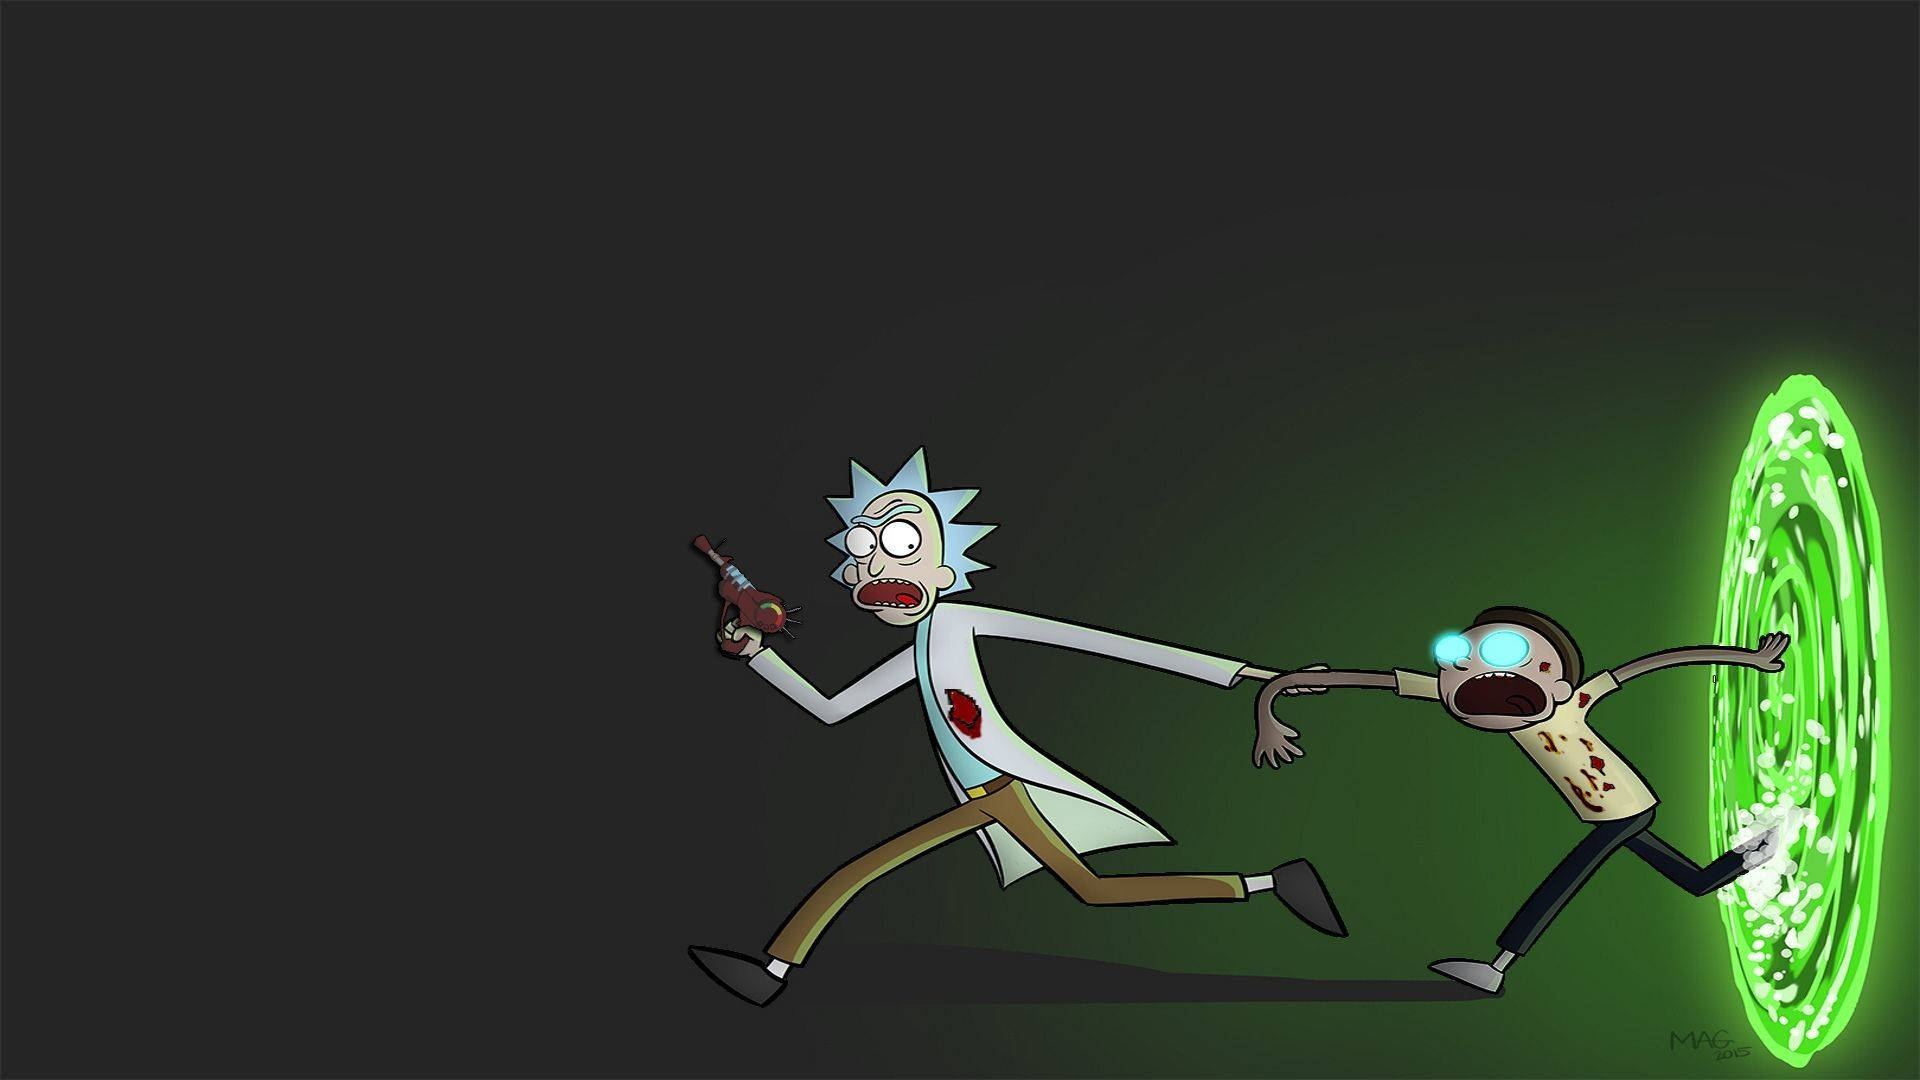 Travel Through Time And Space With Rick And Morty! Background